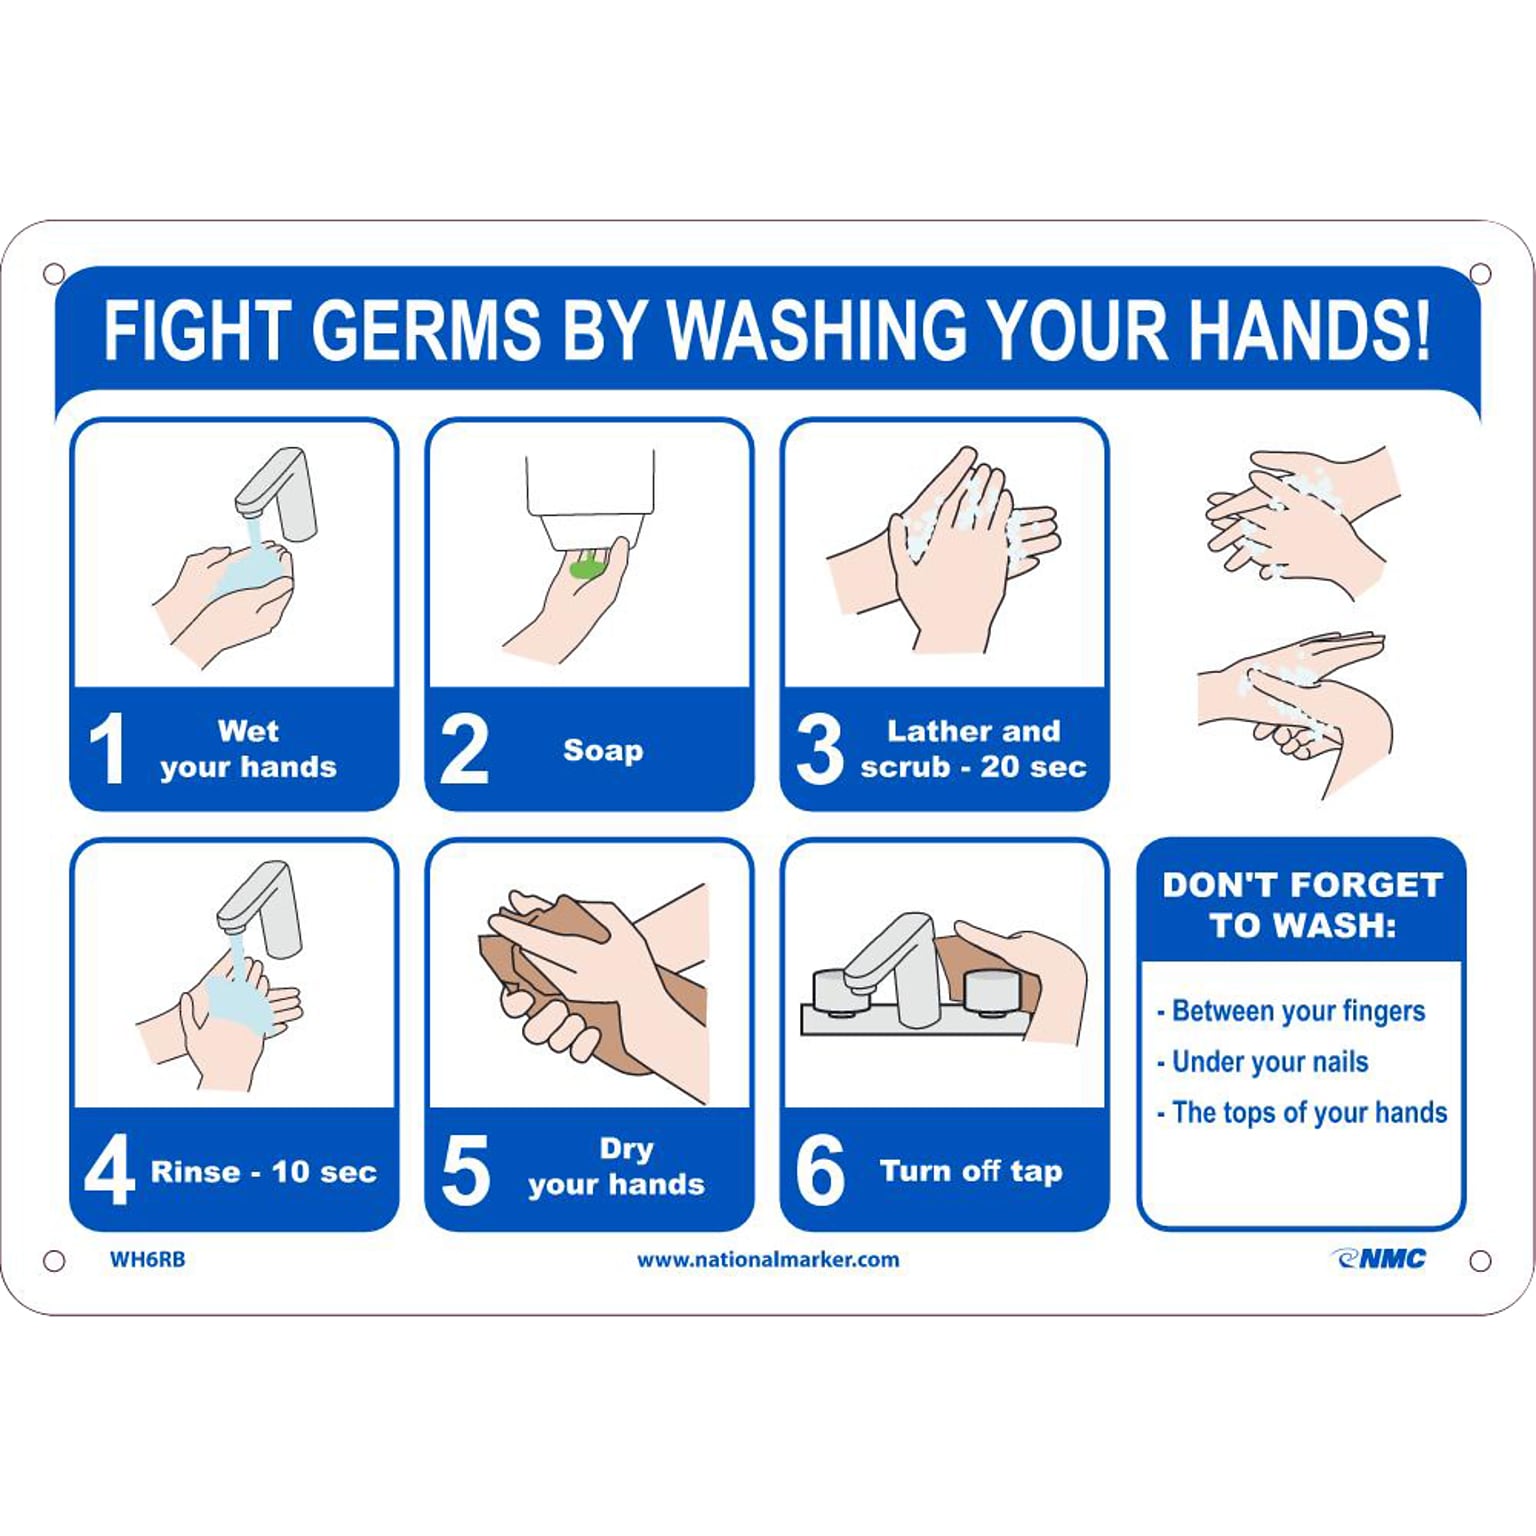 National Marker Wall Sign, Fight Germs by Washing Your Hands!, Plastic, 10 x 14, Blue/White (WH6RB)